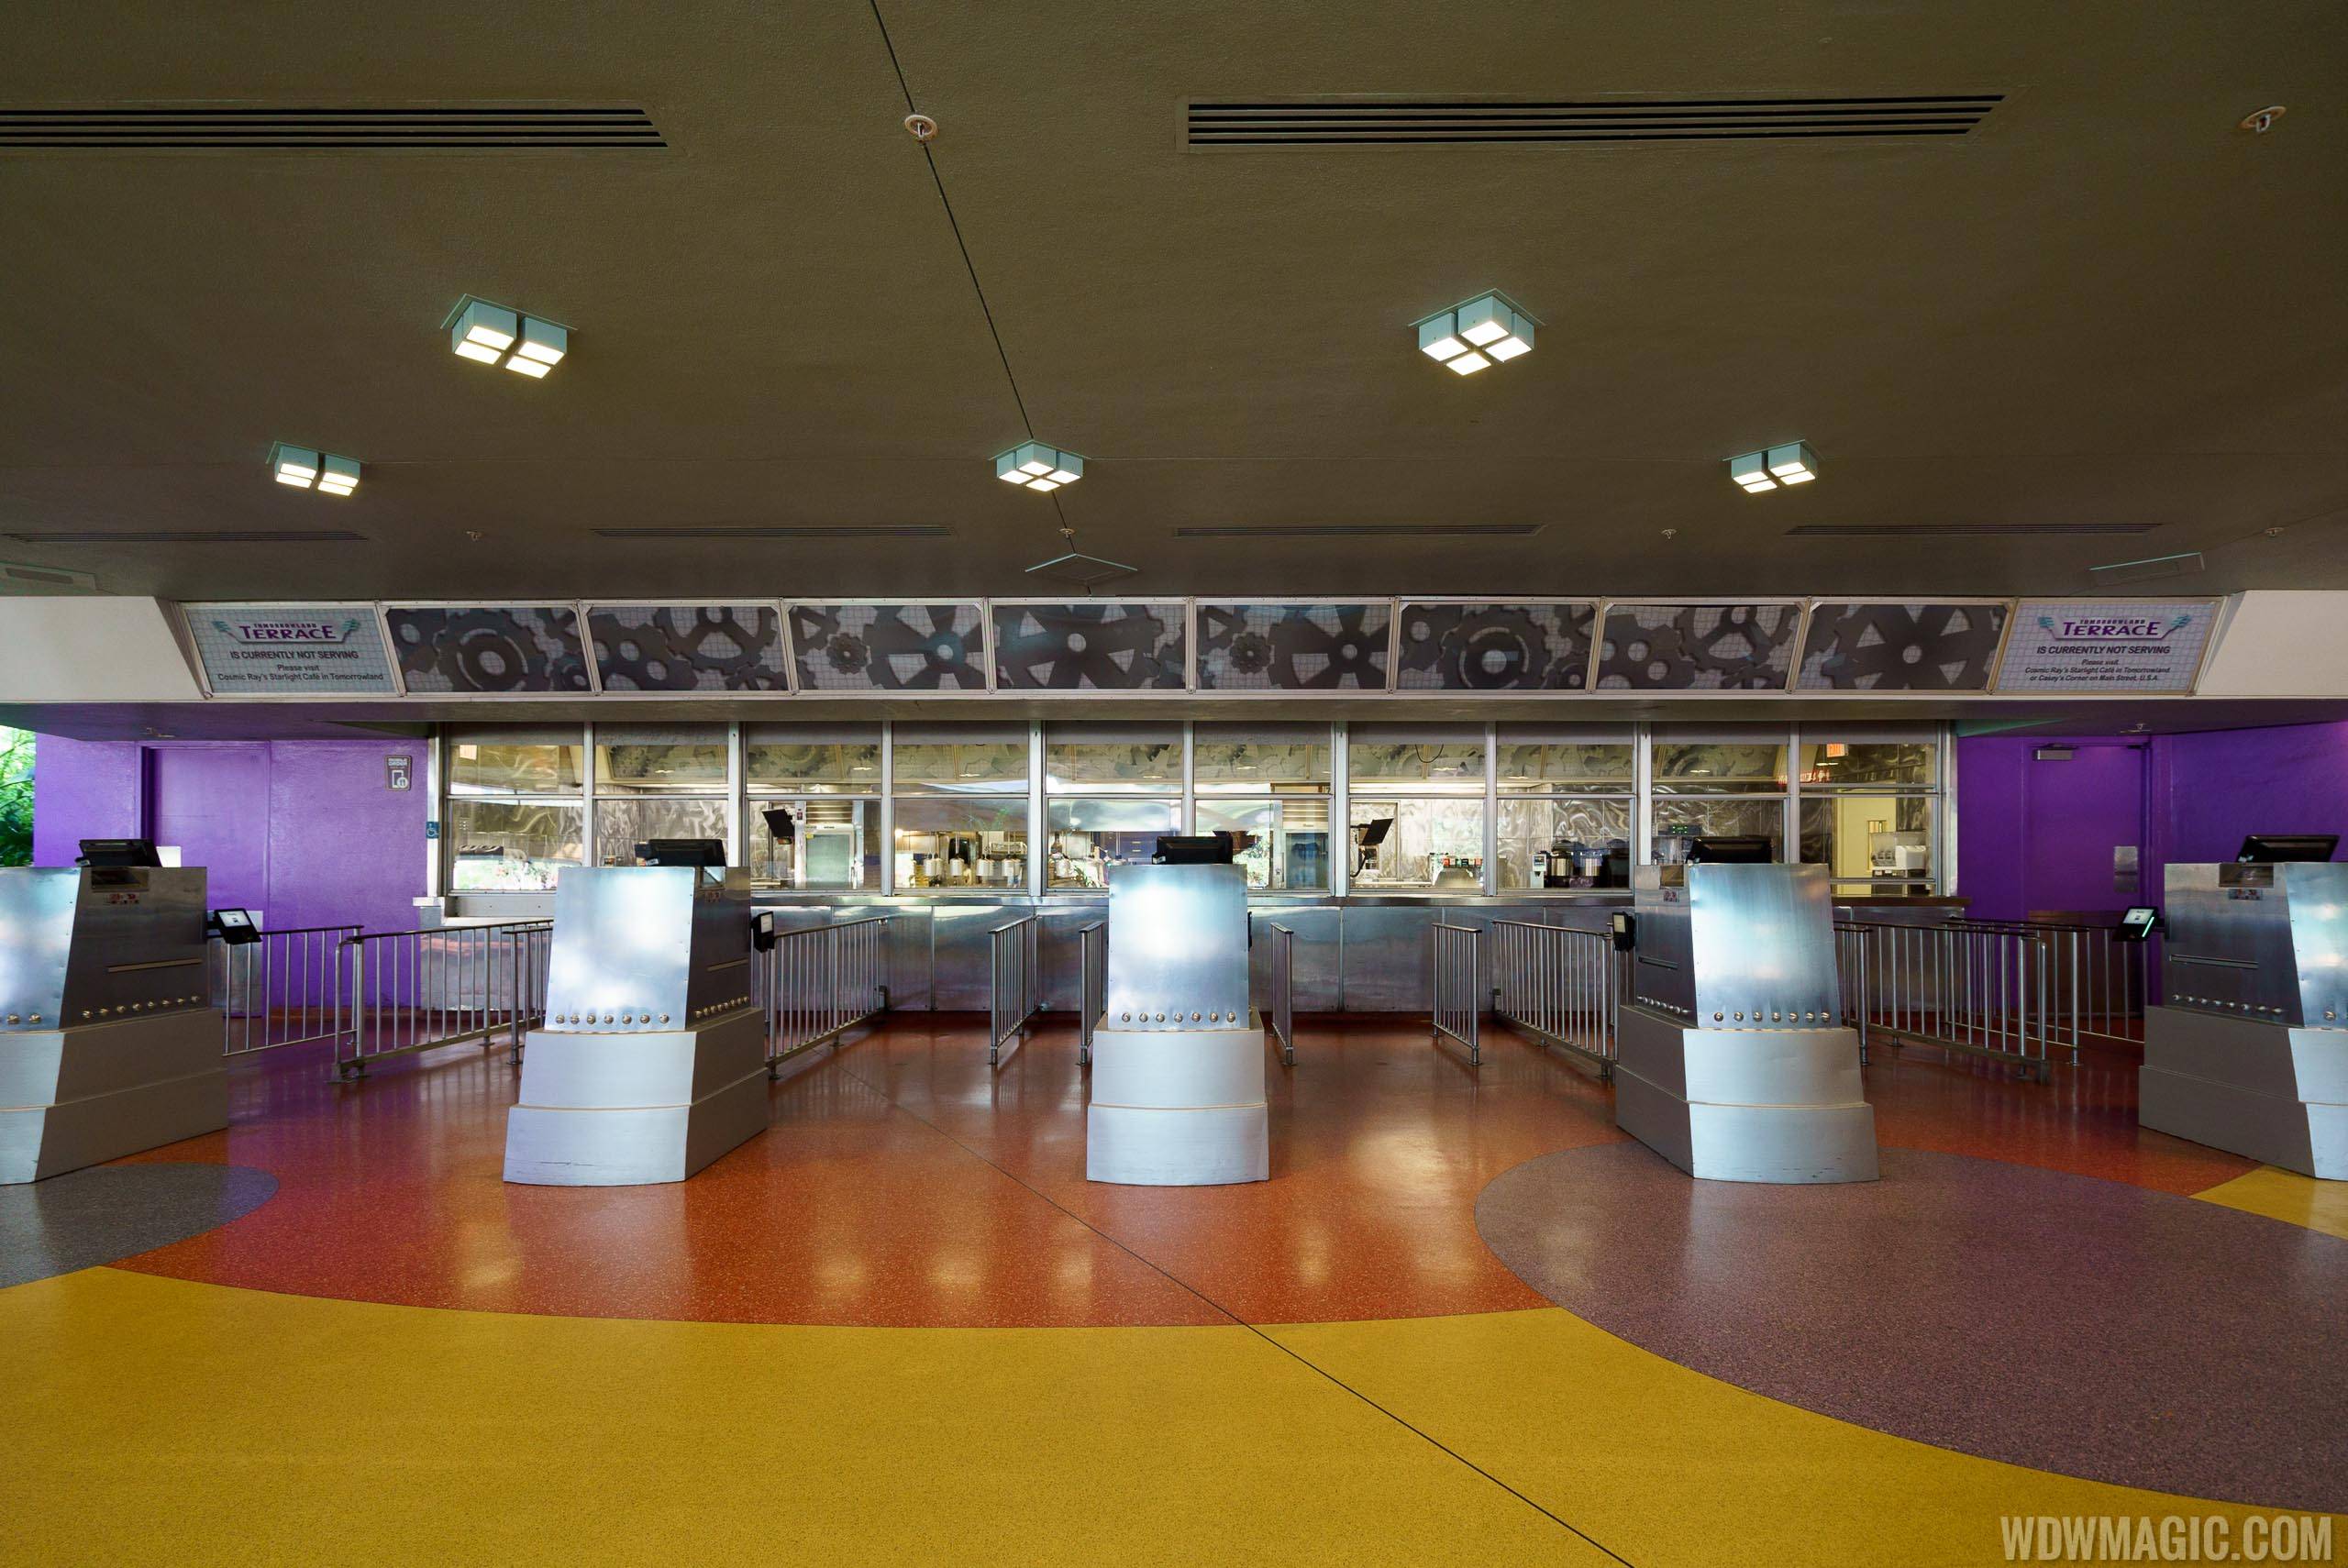 Tomorrowland Terrace to open for breakfast during Main Street Bakery Starbucks conversion